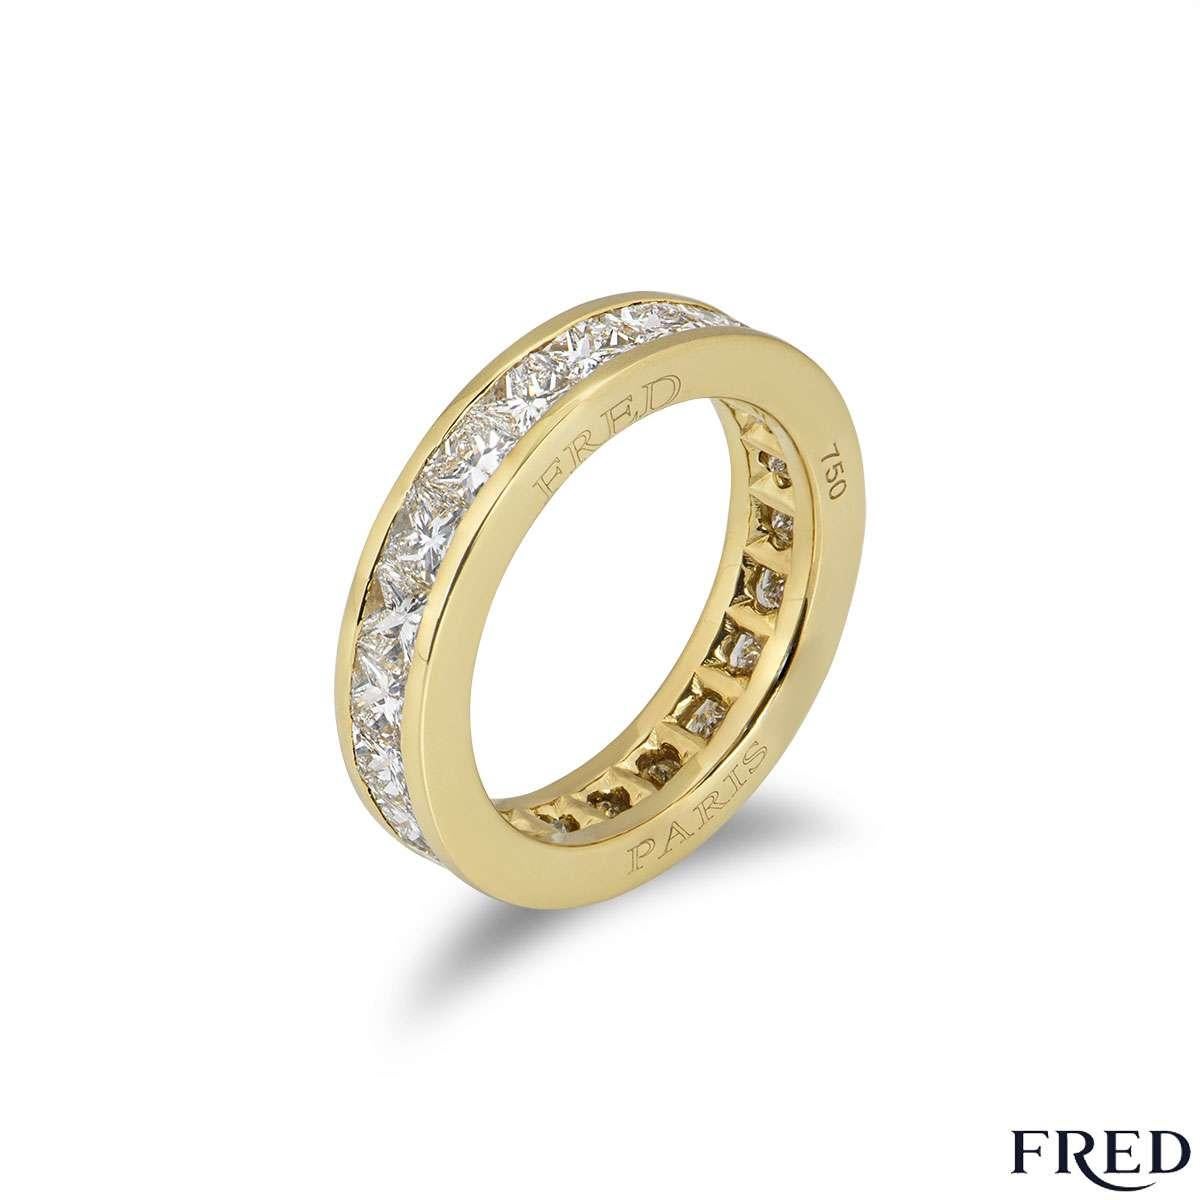 A beautiful 18k yellow gold Fred diamond eternity ring from the Bridal collection. The ring comprises of princess cut diamonds in a tension setting all the way around the ring. There are 22 diamonds with a total weight of approximately 2.20ct. The